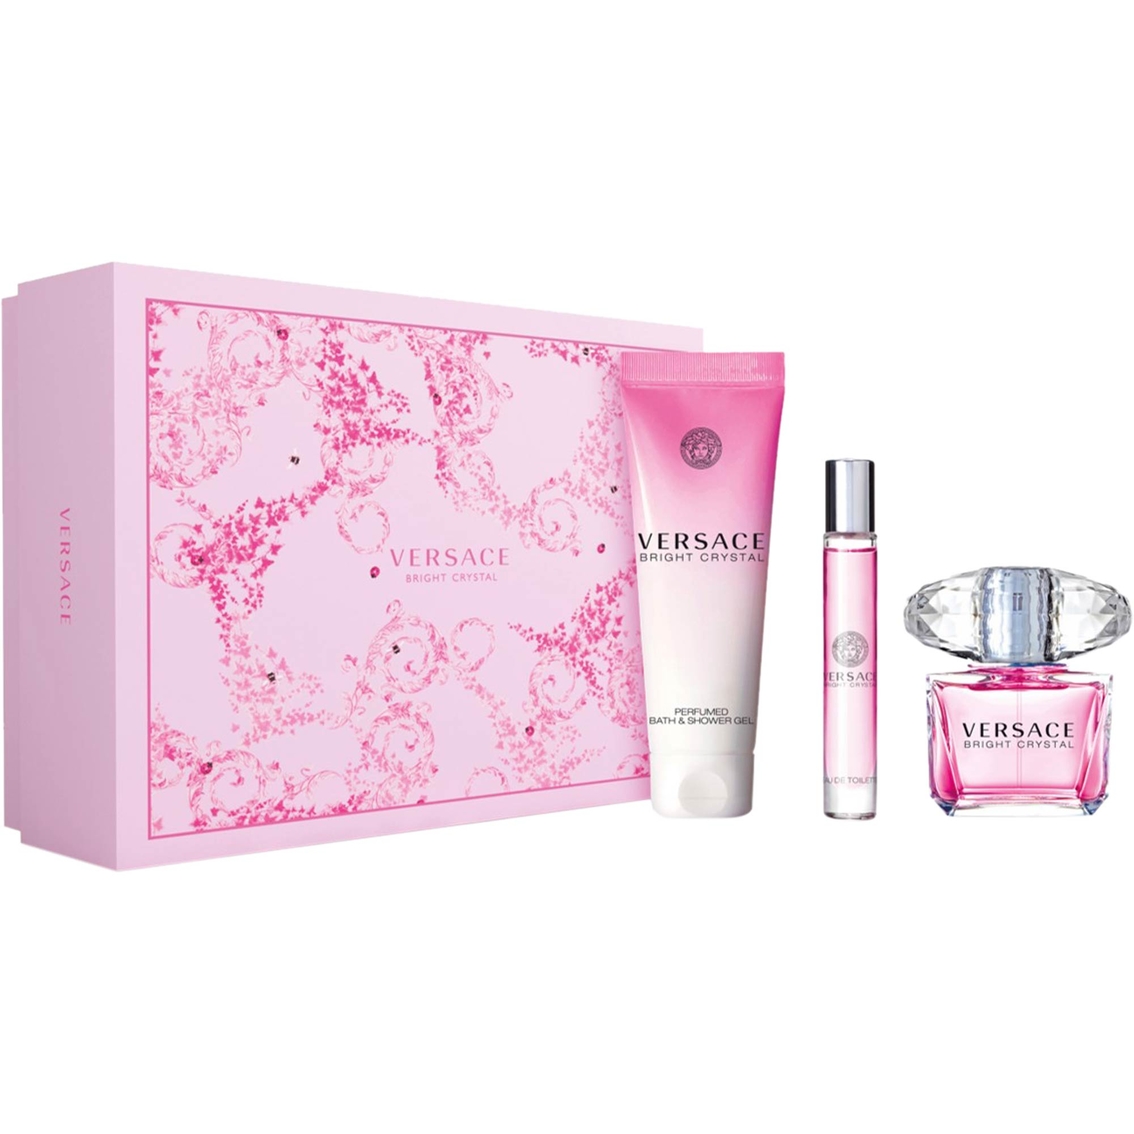 Versace Bright Crystal Gift Set | Gifts 